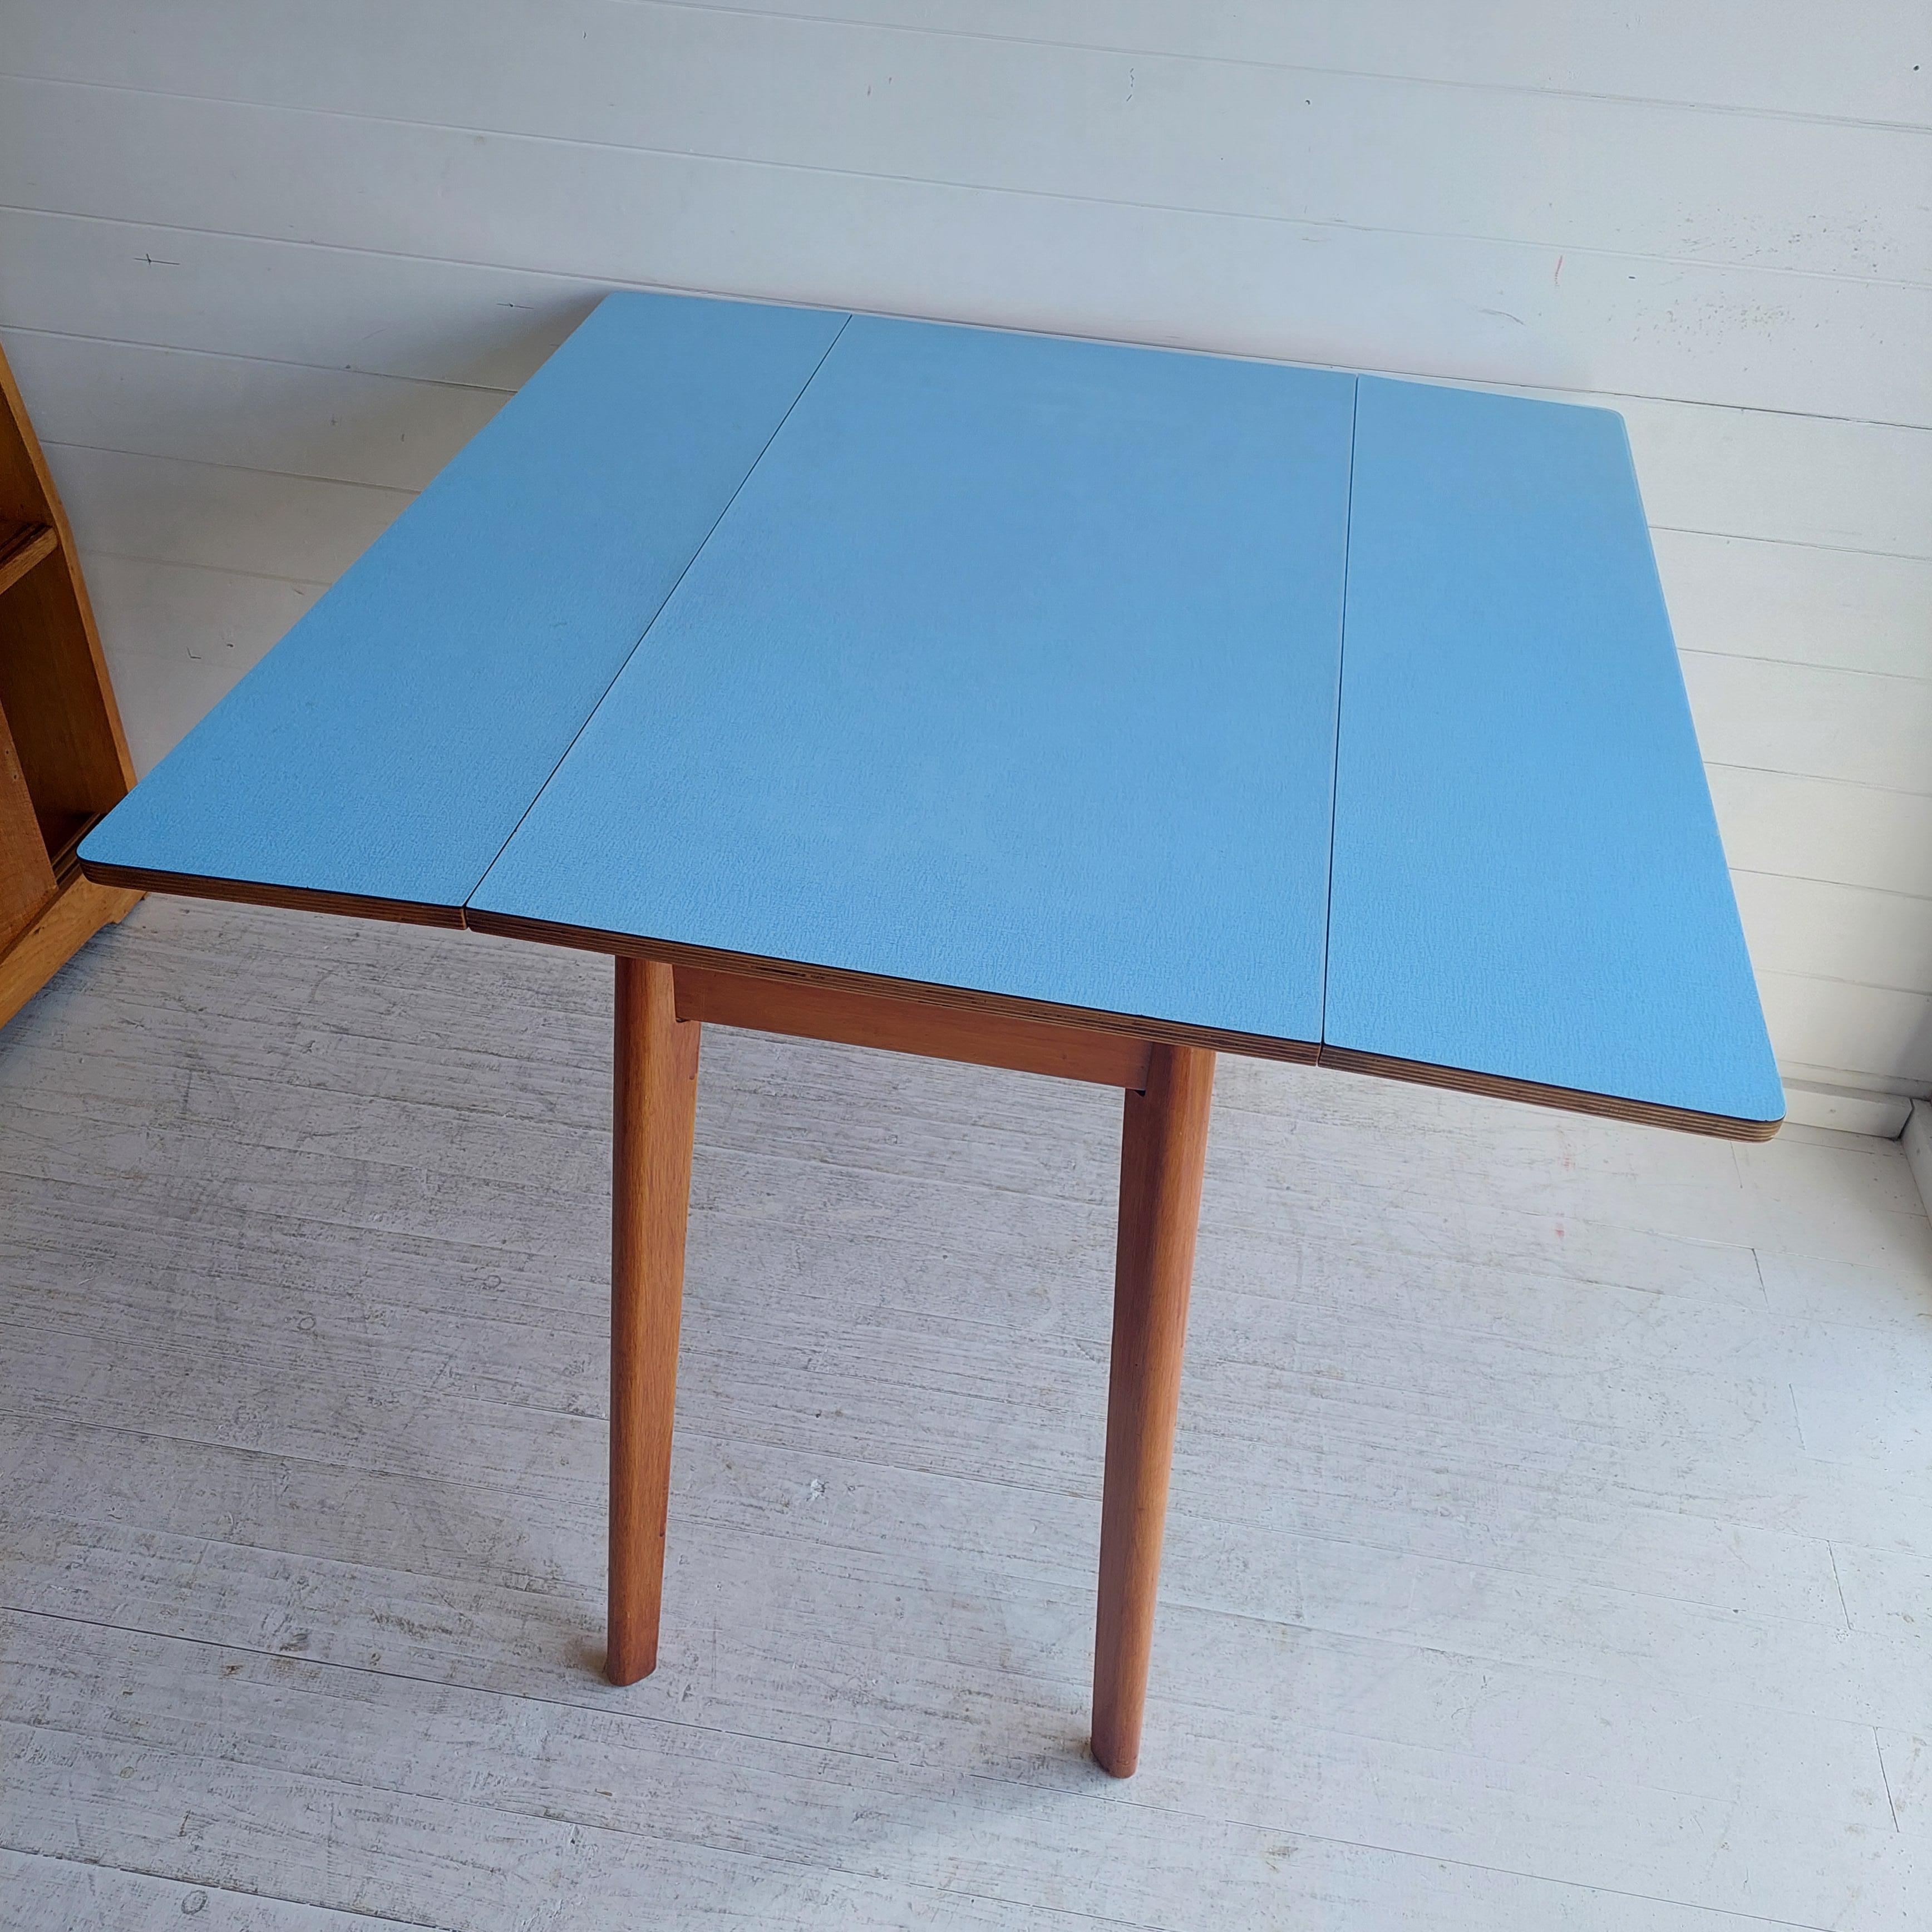 European Mid Century Blue Formica Drop Leaf Kitchen Dining Table With Wooden Legs 60s